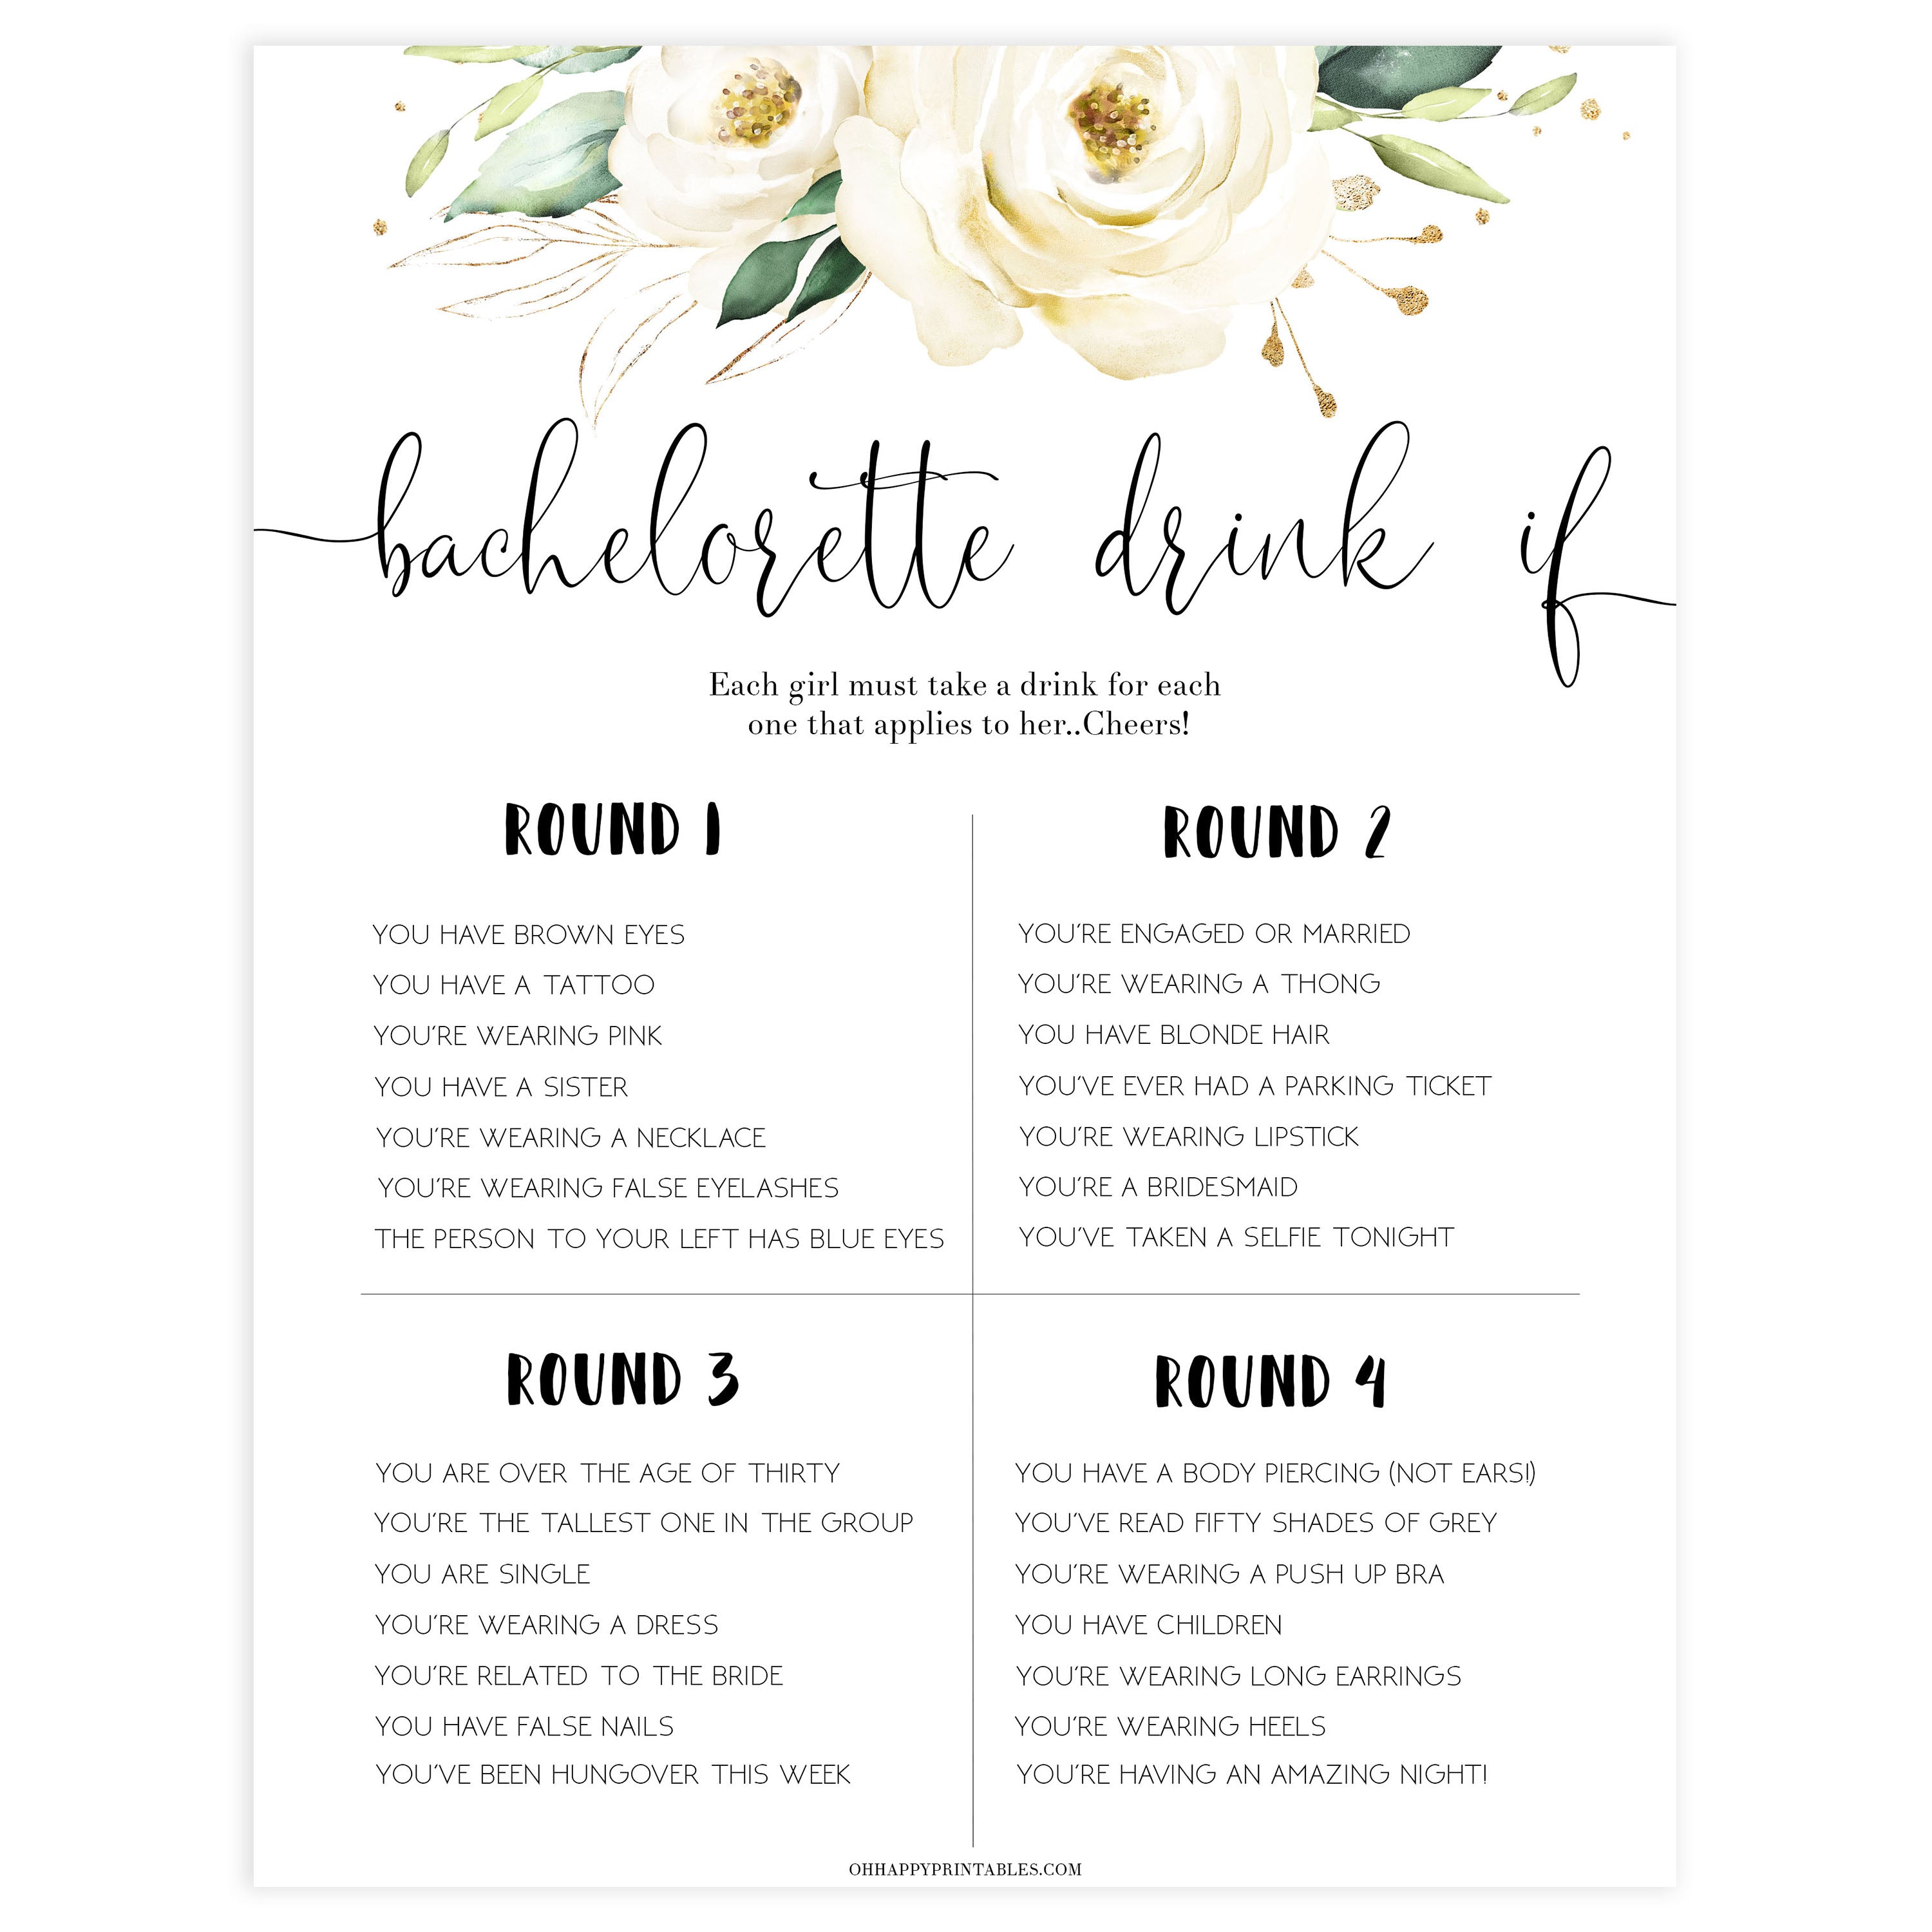 bachelorette drink if game, drink if game, Printable bachelorette games, floral bachelorette, floral hen party games, fun hen party games, bachelorette game ideas, floral adult party games, naughty hen games, naughty bachelorette games